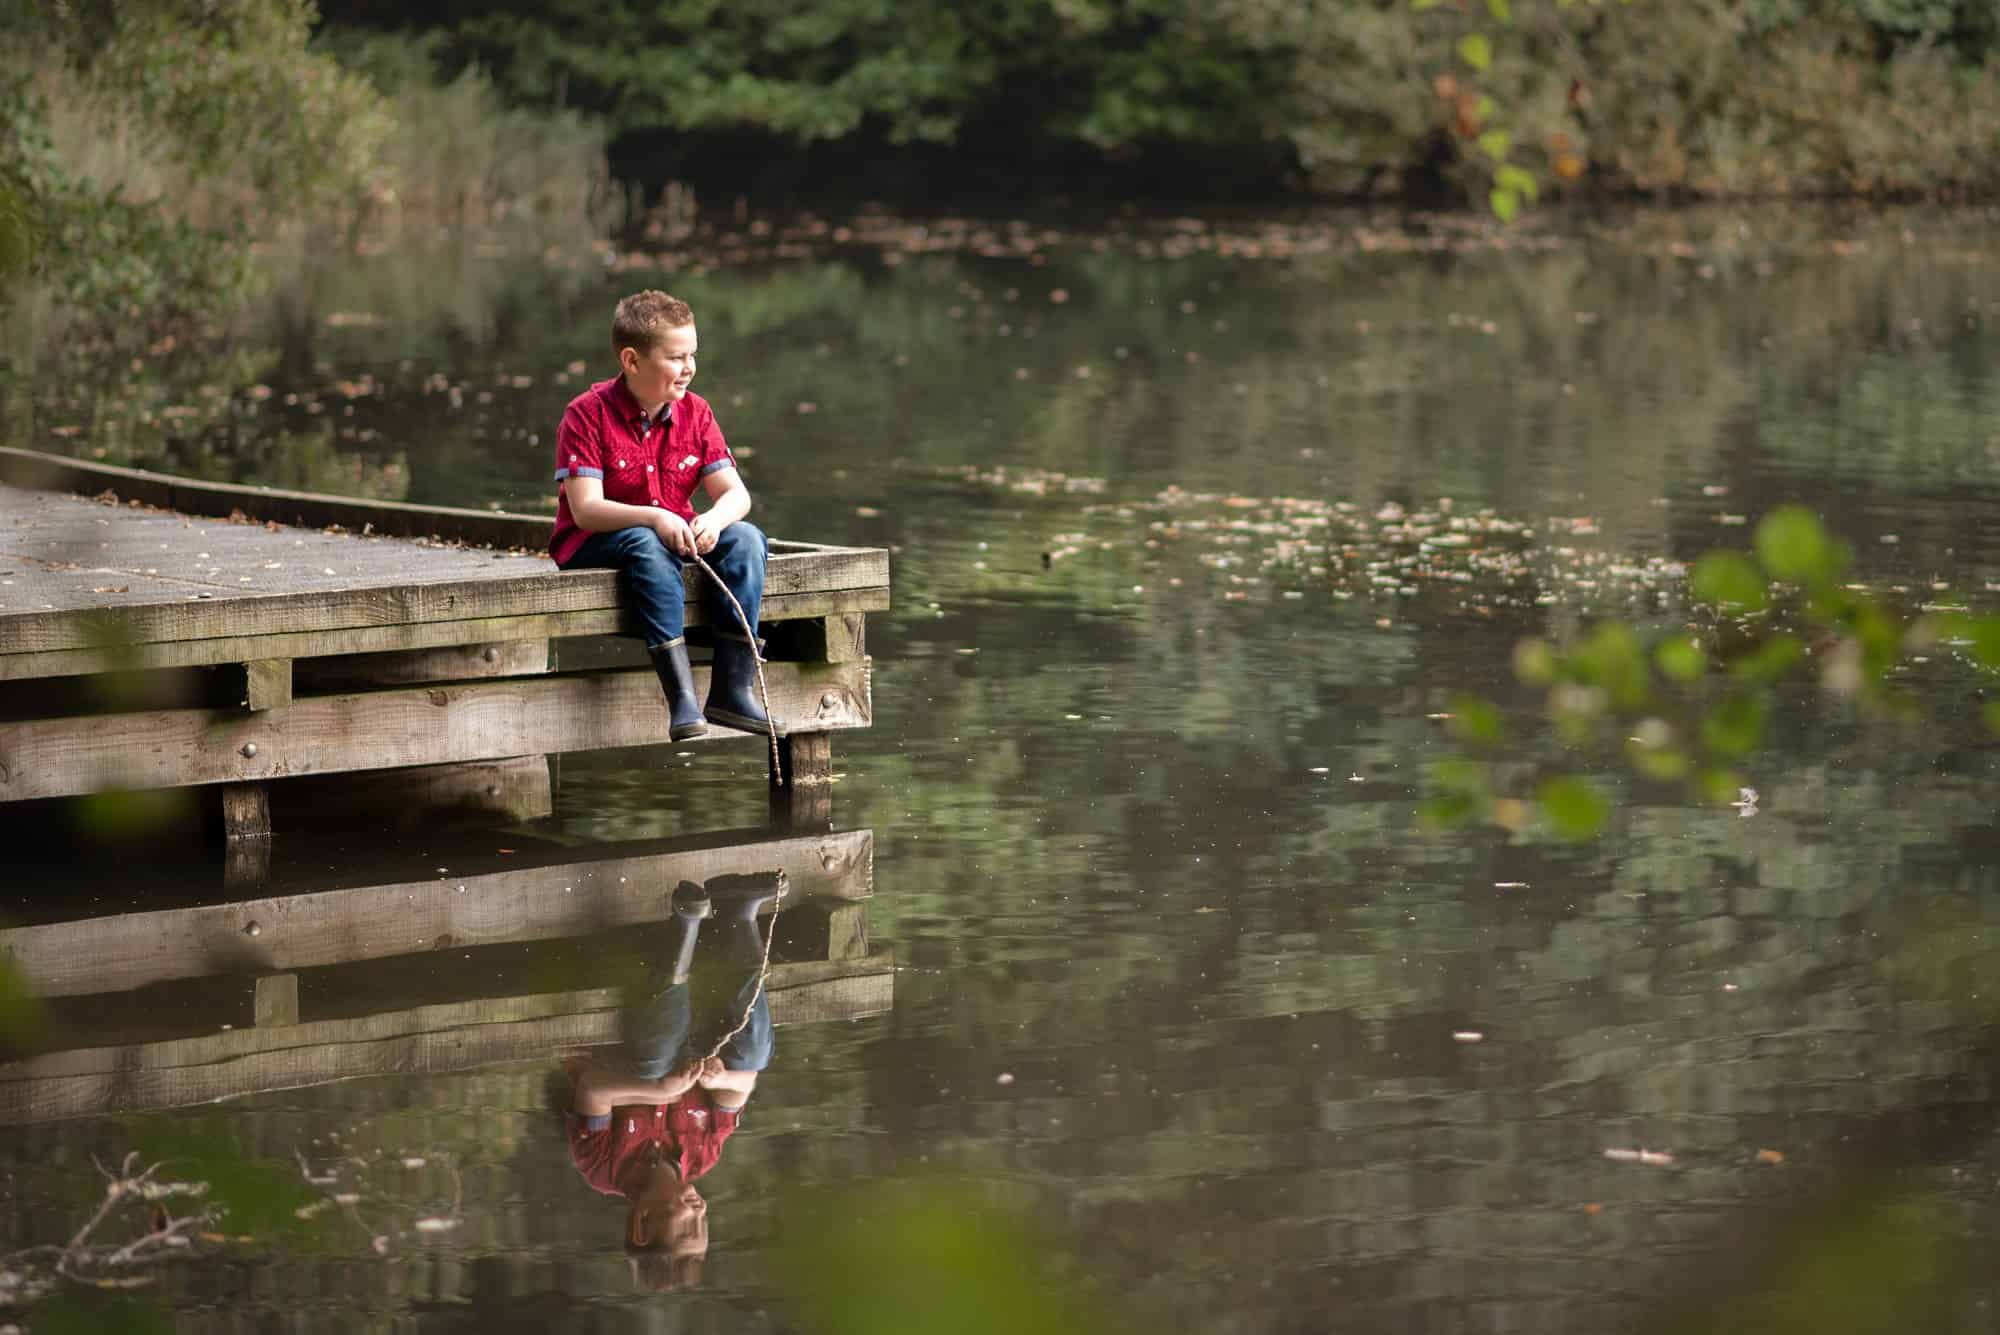 Fun Family photo, taken of the whole family at Swanick lakes for a relaxed and fun photo shoot. in Hampshire